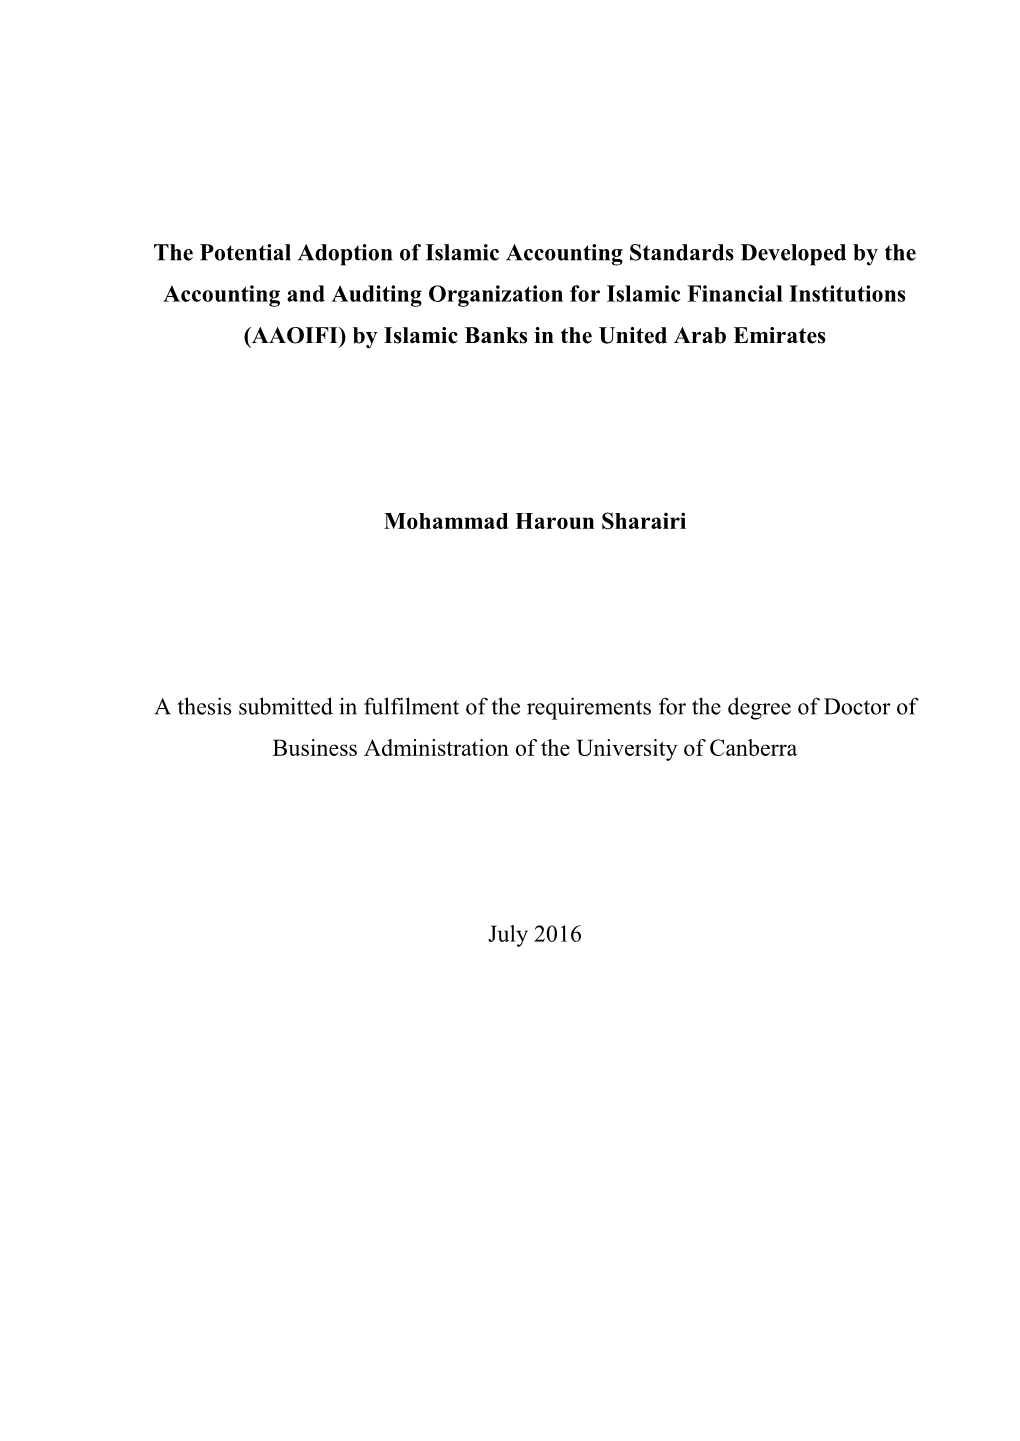 The Potential Adoption of Islamic Accounting Standards Developed by the Accounting and Auditing Organization for Islamic Financi